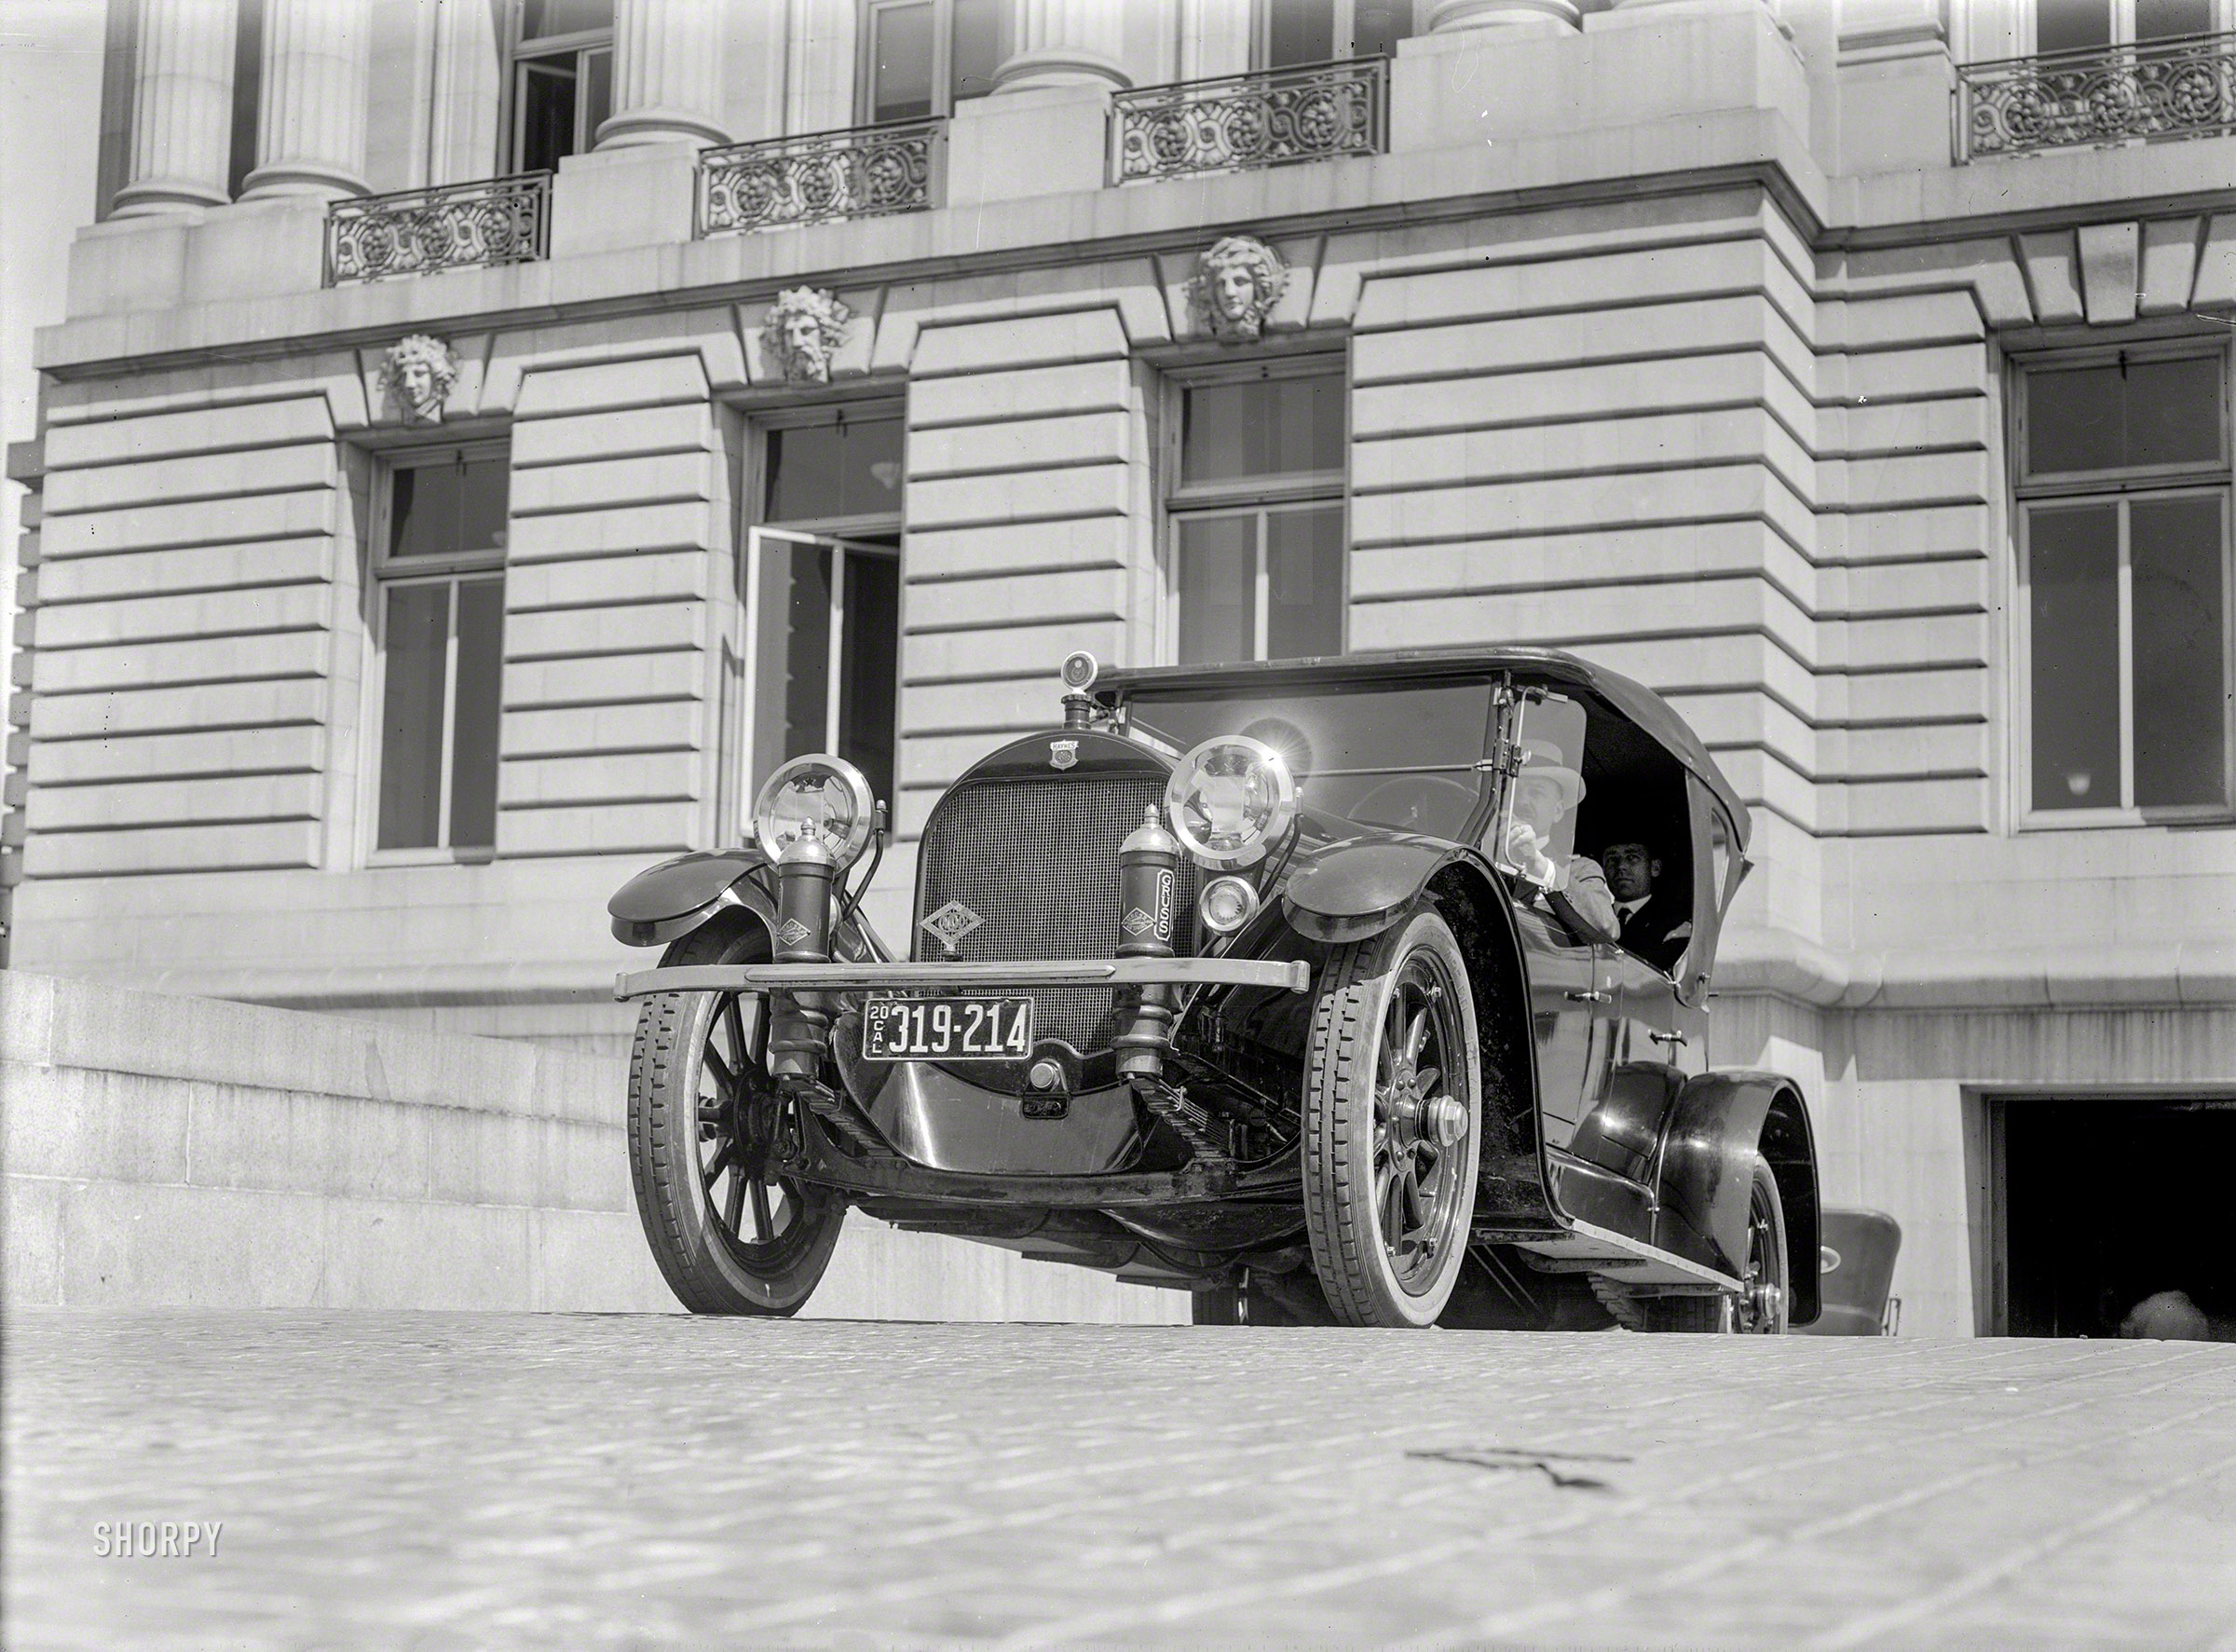 San Francisco, 1920. "Haynes touring car leaving garage." Riding on Gruss Air Springs. 5x7 glass negative by Christopher Helin. View full size.